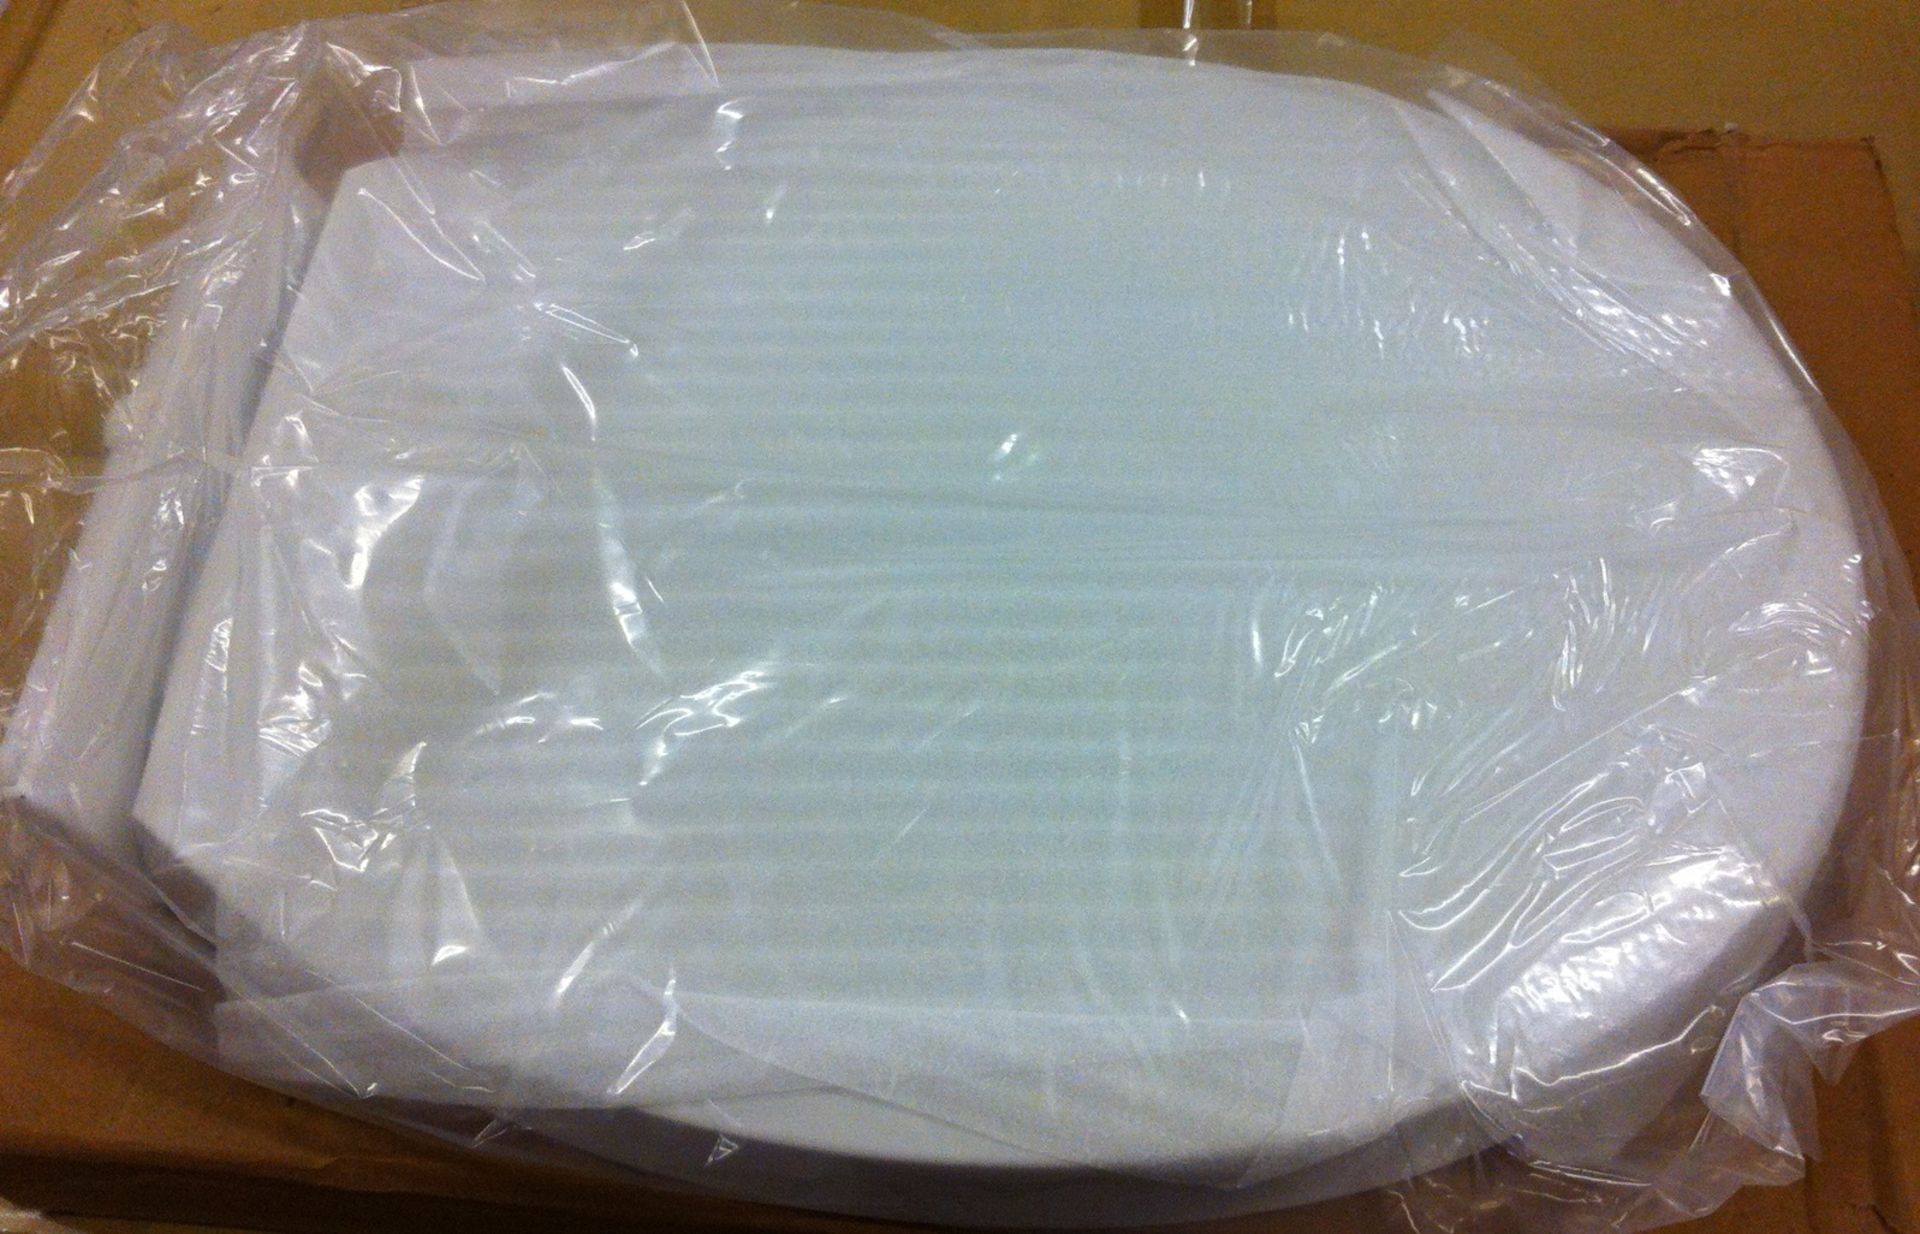 100 x Deluxe Soft Close White Toilet Seats - Brand New Boxed Stock - CL034 - Ideal For Resale - - Image 6 of 6